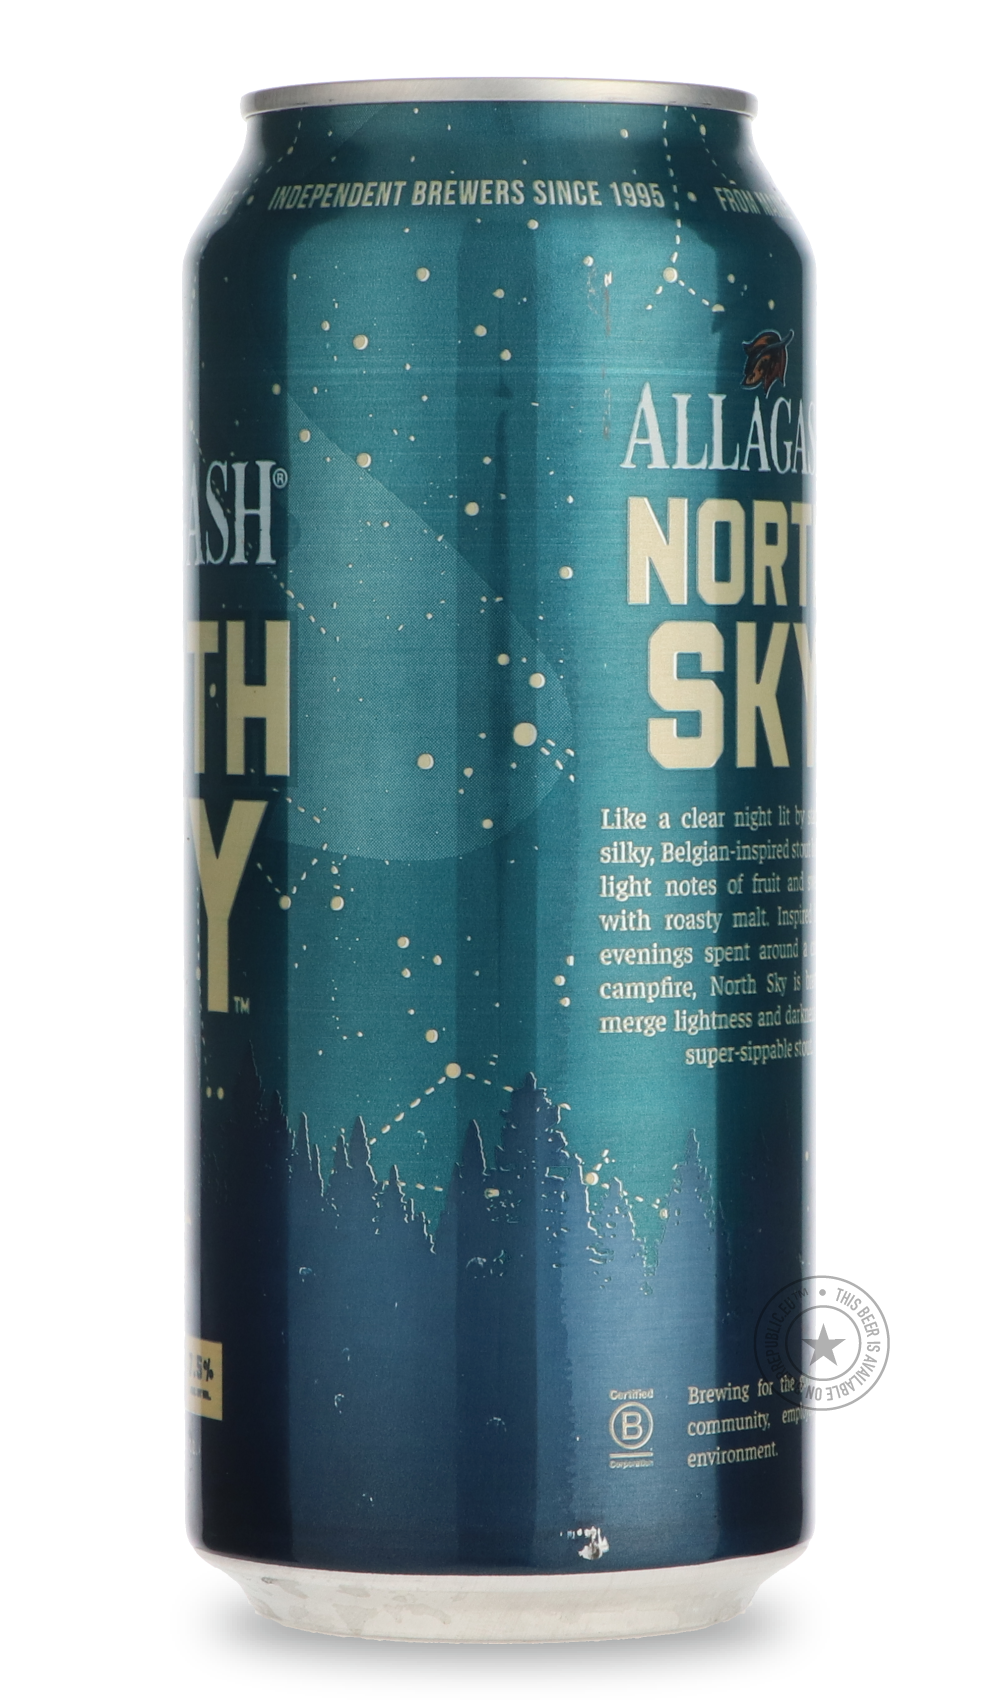 -Allagash- North Sky-Stout & Porter- Only @ Beer Republic - The best online beer store for American & Canadian craft beer - Buy beer online from the USA and Canada - Bier online kopen - Amerikaans bier kopen - Craft beer store - Craft beer kopen - Amerikanisch bier kaufen - Bier online kaufen - Acheter biere online - IPA - Stout - Porter - New England IPA - Hazy IPA - Imperial Stout - Barrel Aged - Barrel Aged Imperial Stout - Brown - Dark beer - Blond - Blonde - Pilsner - Lager - Wheat - Weizen - Amber - B